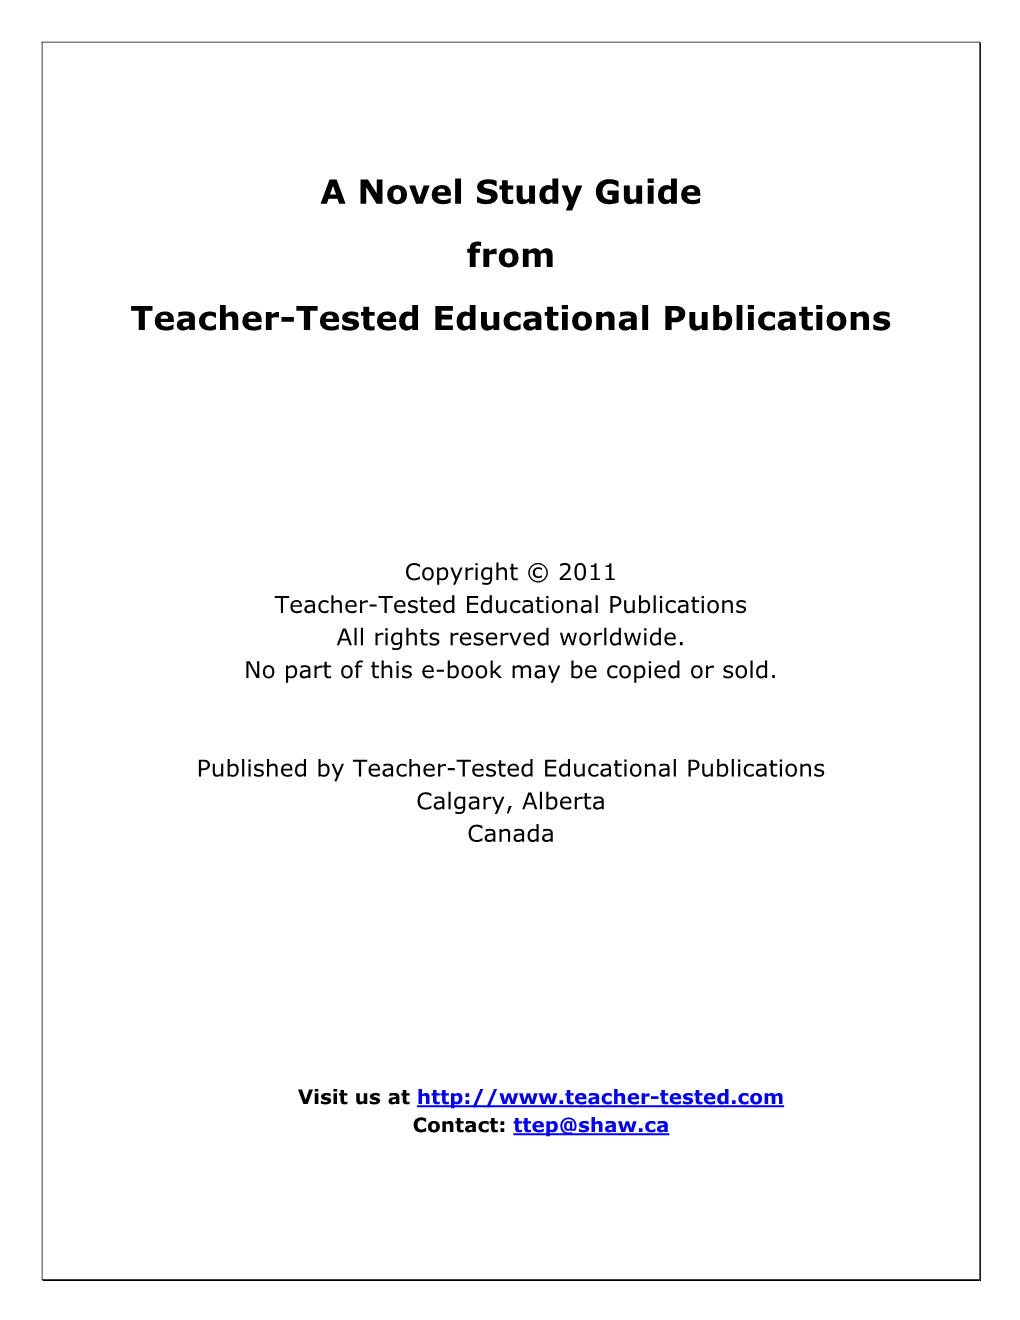 A Novel Study Guide from Teacher-Tested Educational Publications